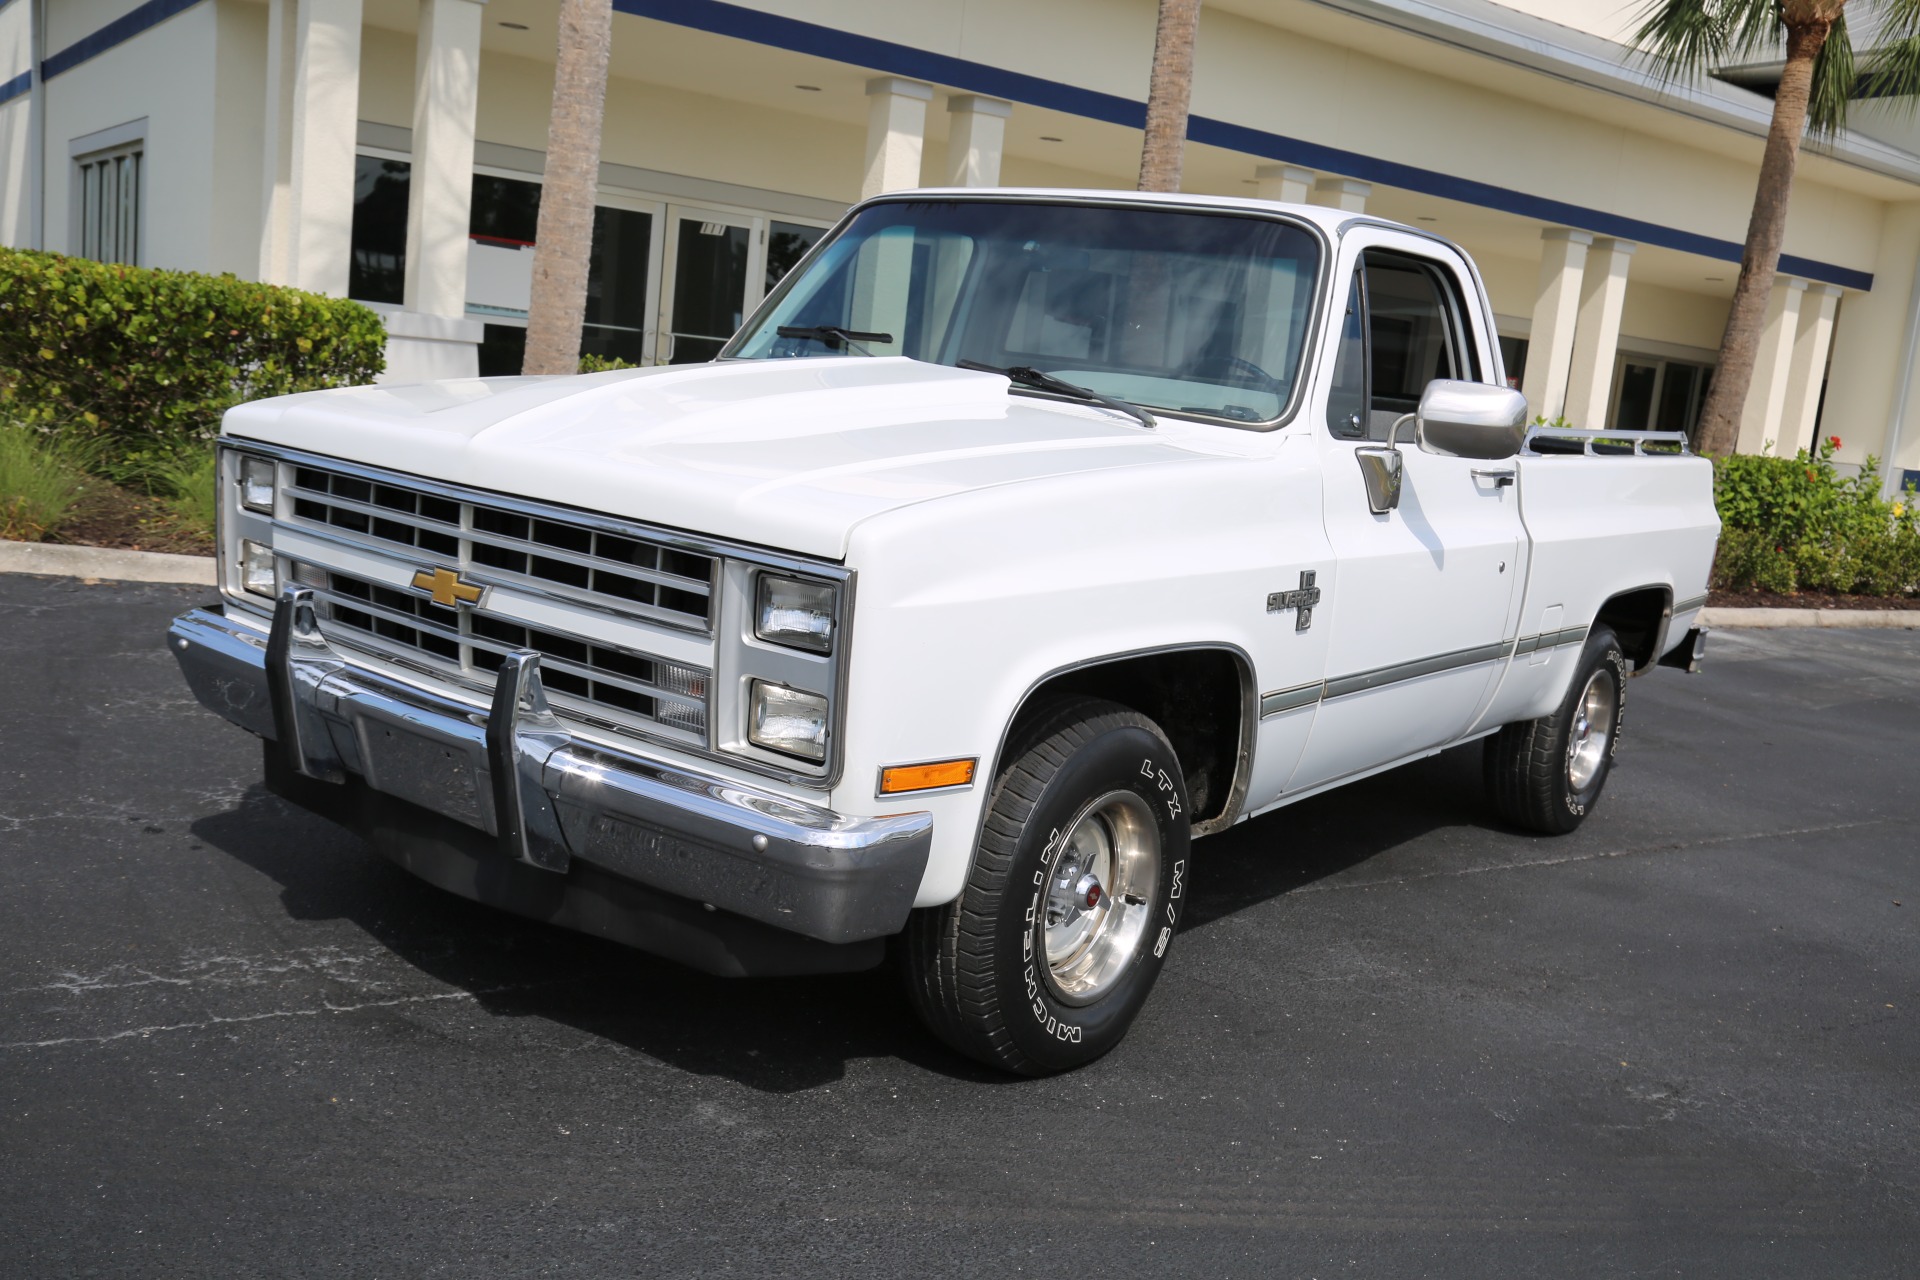 Used 1984 Chevrolet C/K 10 Series C10 Silverado for sale Sold at Muscle Cars for Sale Inc. in Fort Myers FL 33912 6